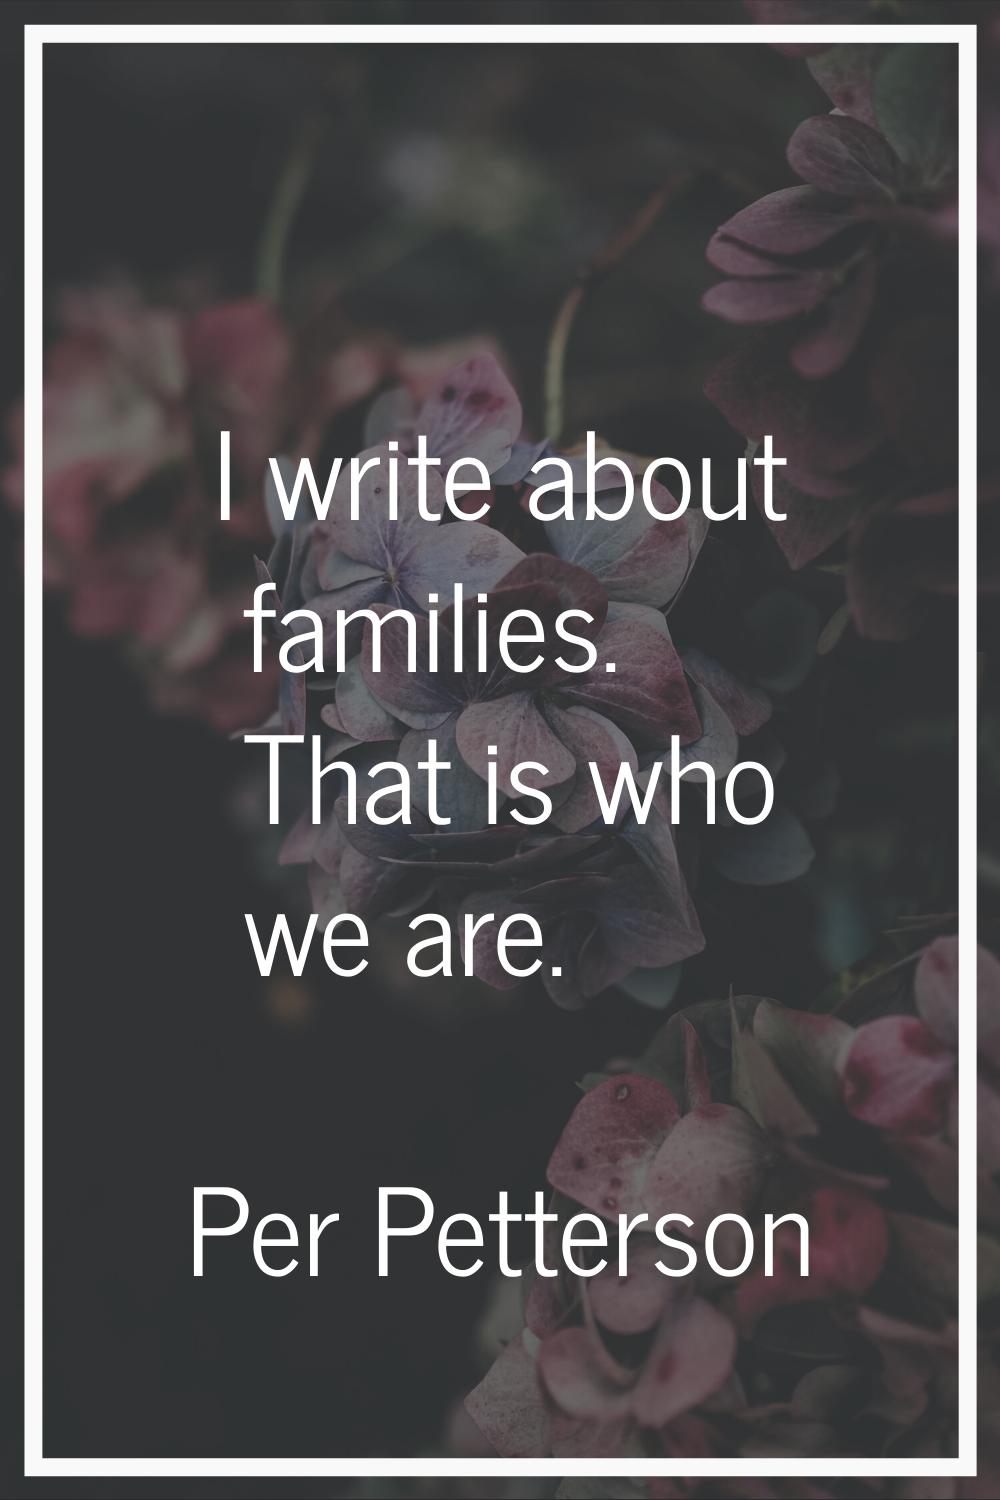 I write about families. That is who we are.